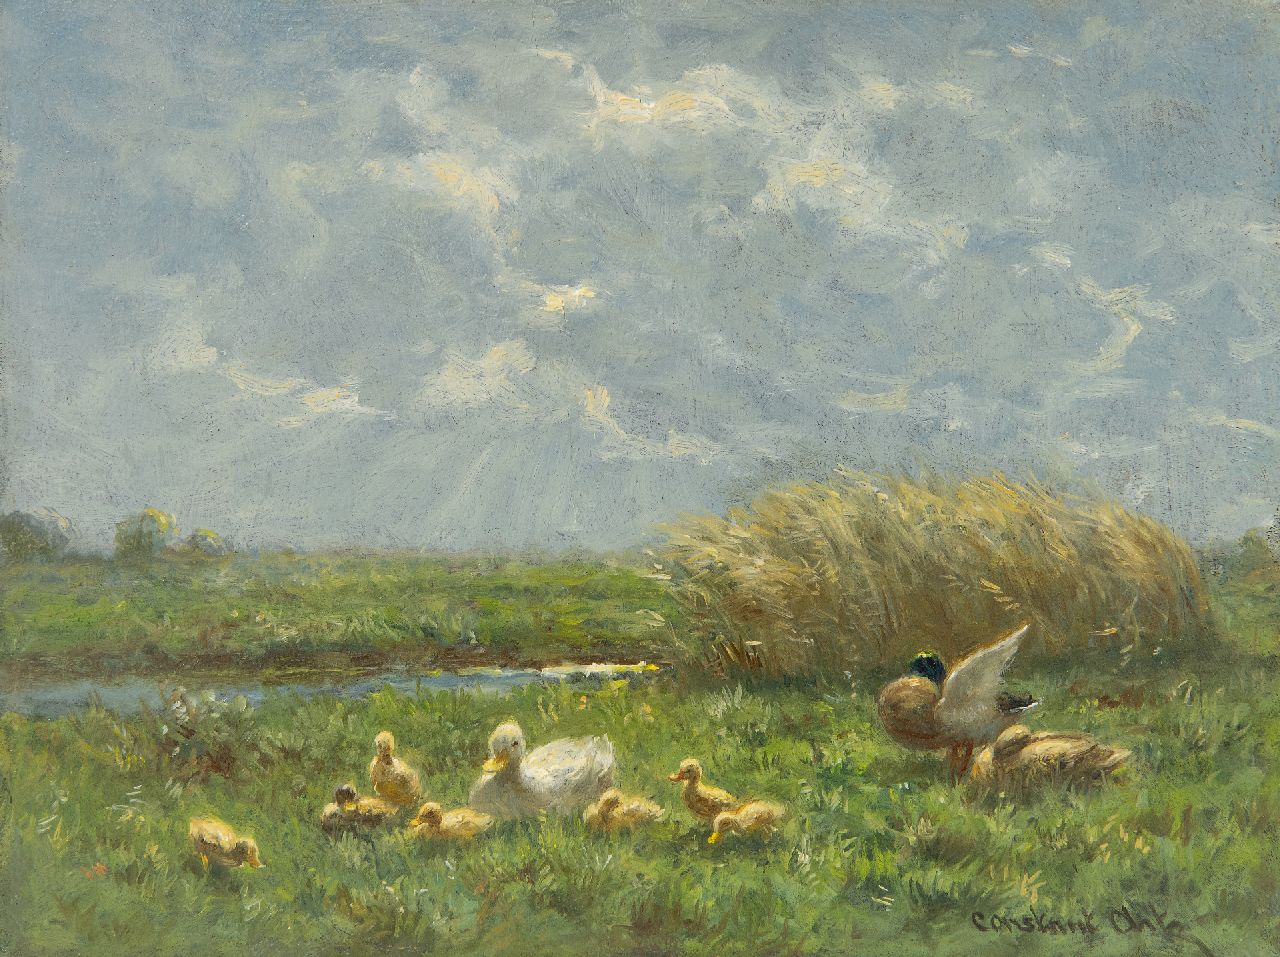 Artz C.D.L.  | 'Constant' David Ludovic Artz | Paintings offered for sale | Duck family in a polder landscape, oil on panel 18.1 x 24.1 cm, signed l.r.